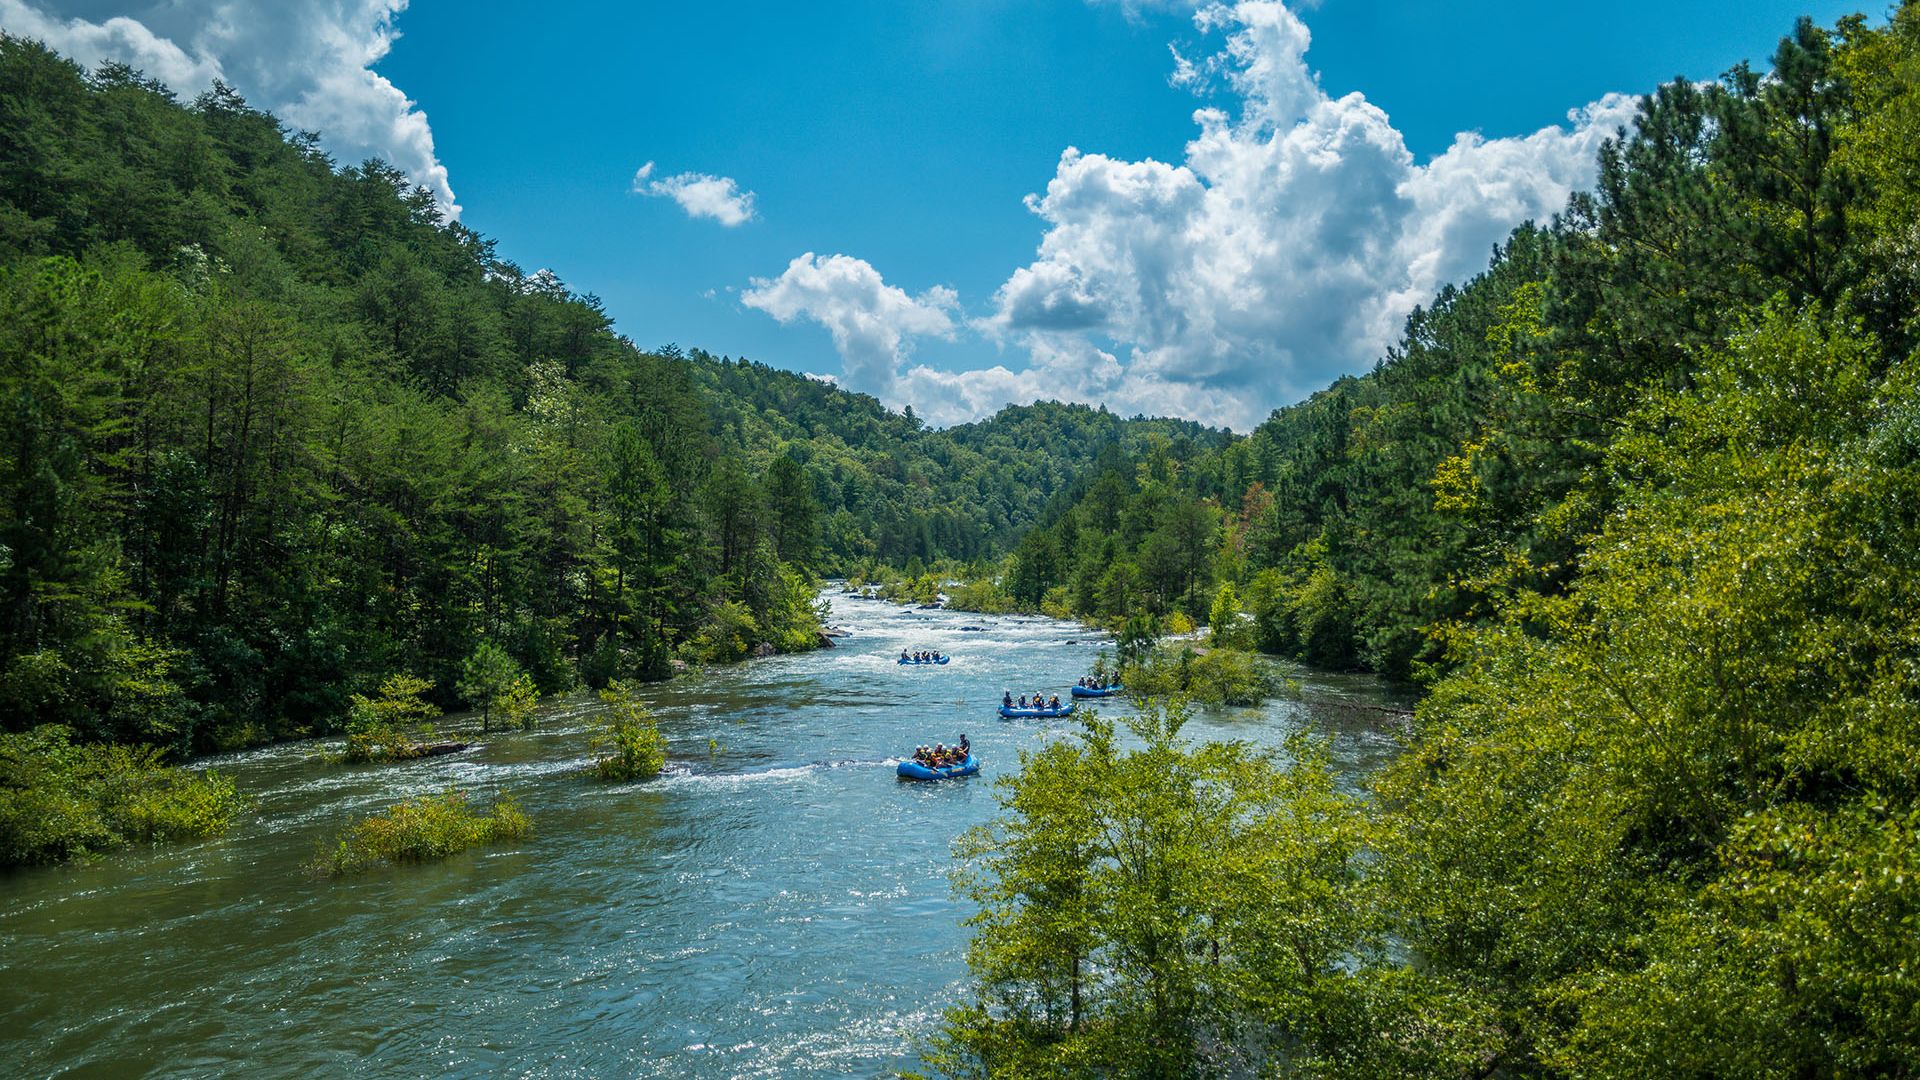 Guided whitewater rafting trips on the Pigeon River in the Smokies 